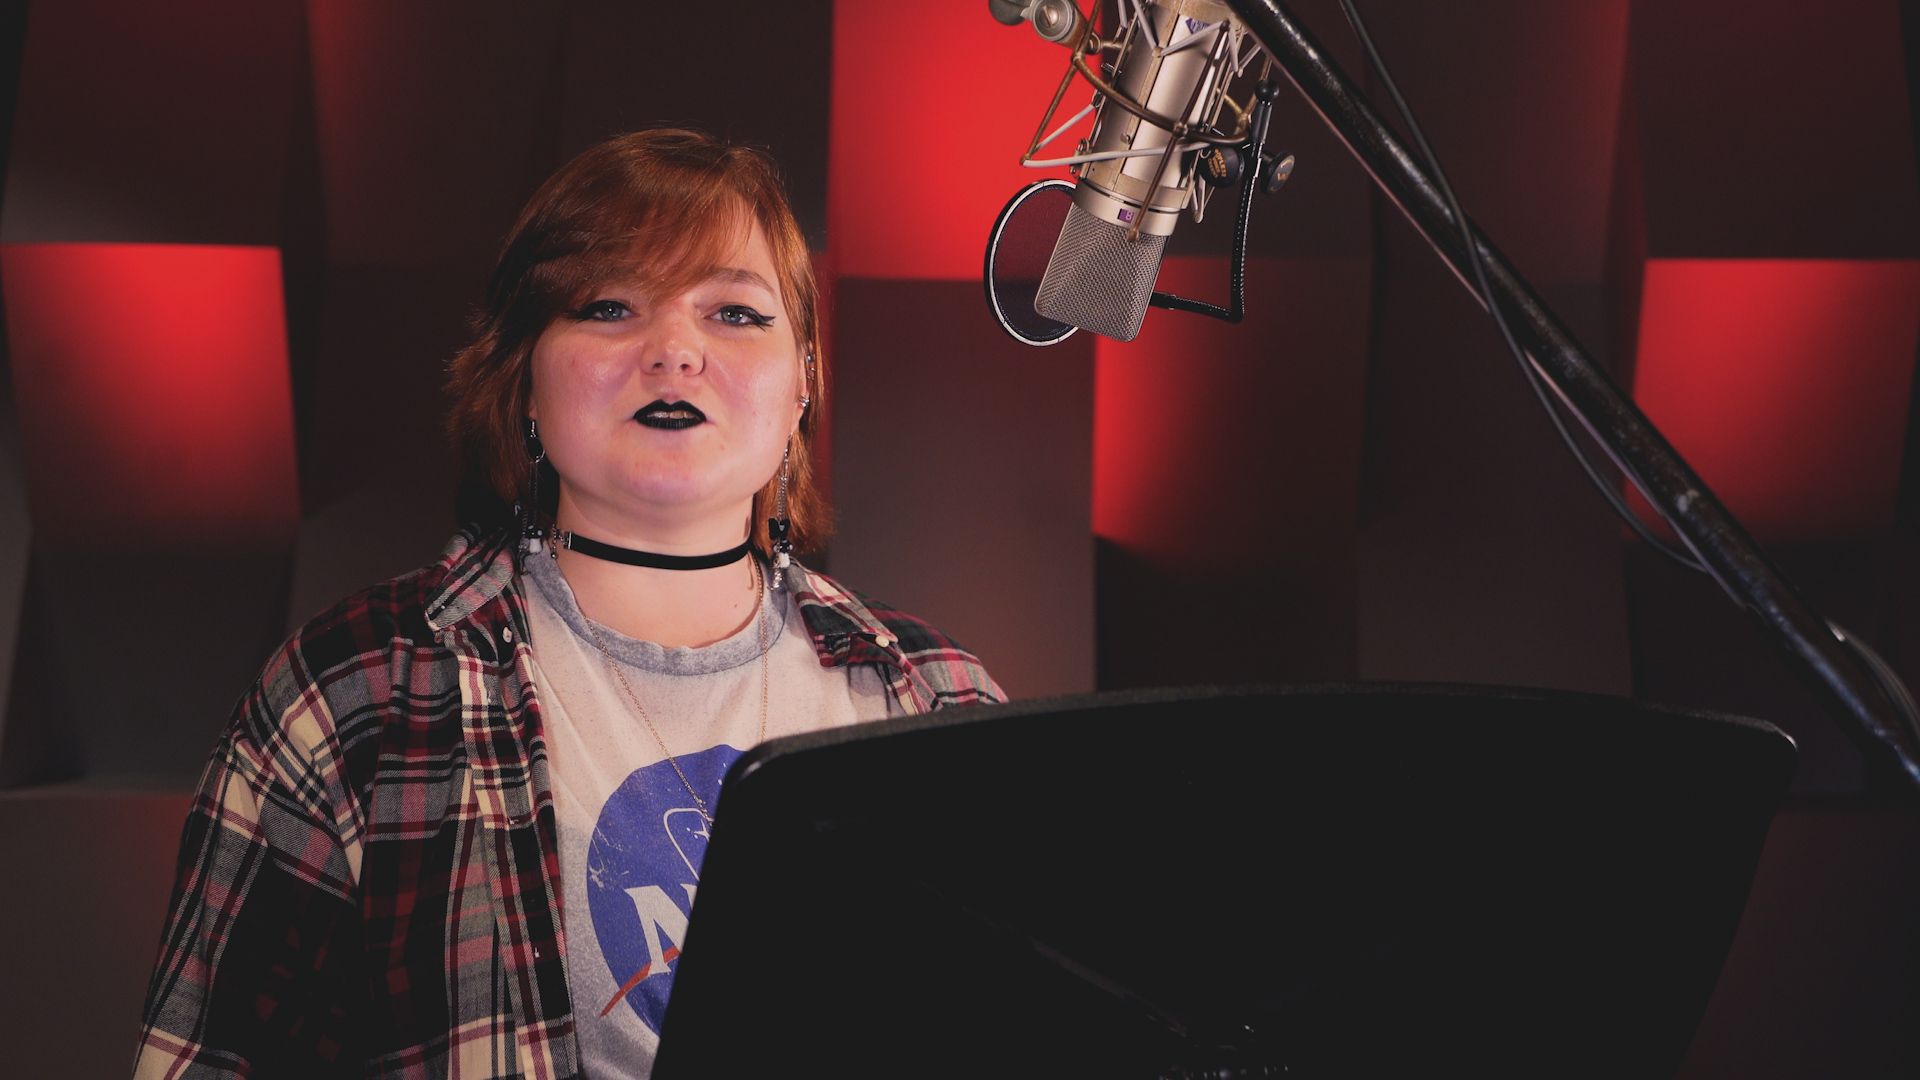 A woman is singing into a microphone in a recording studio.